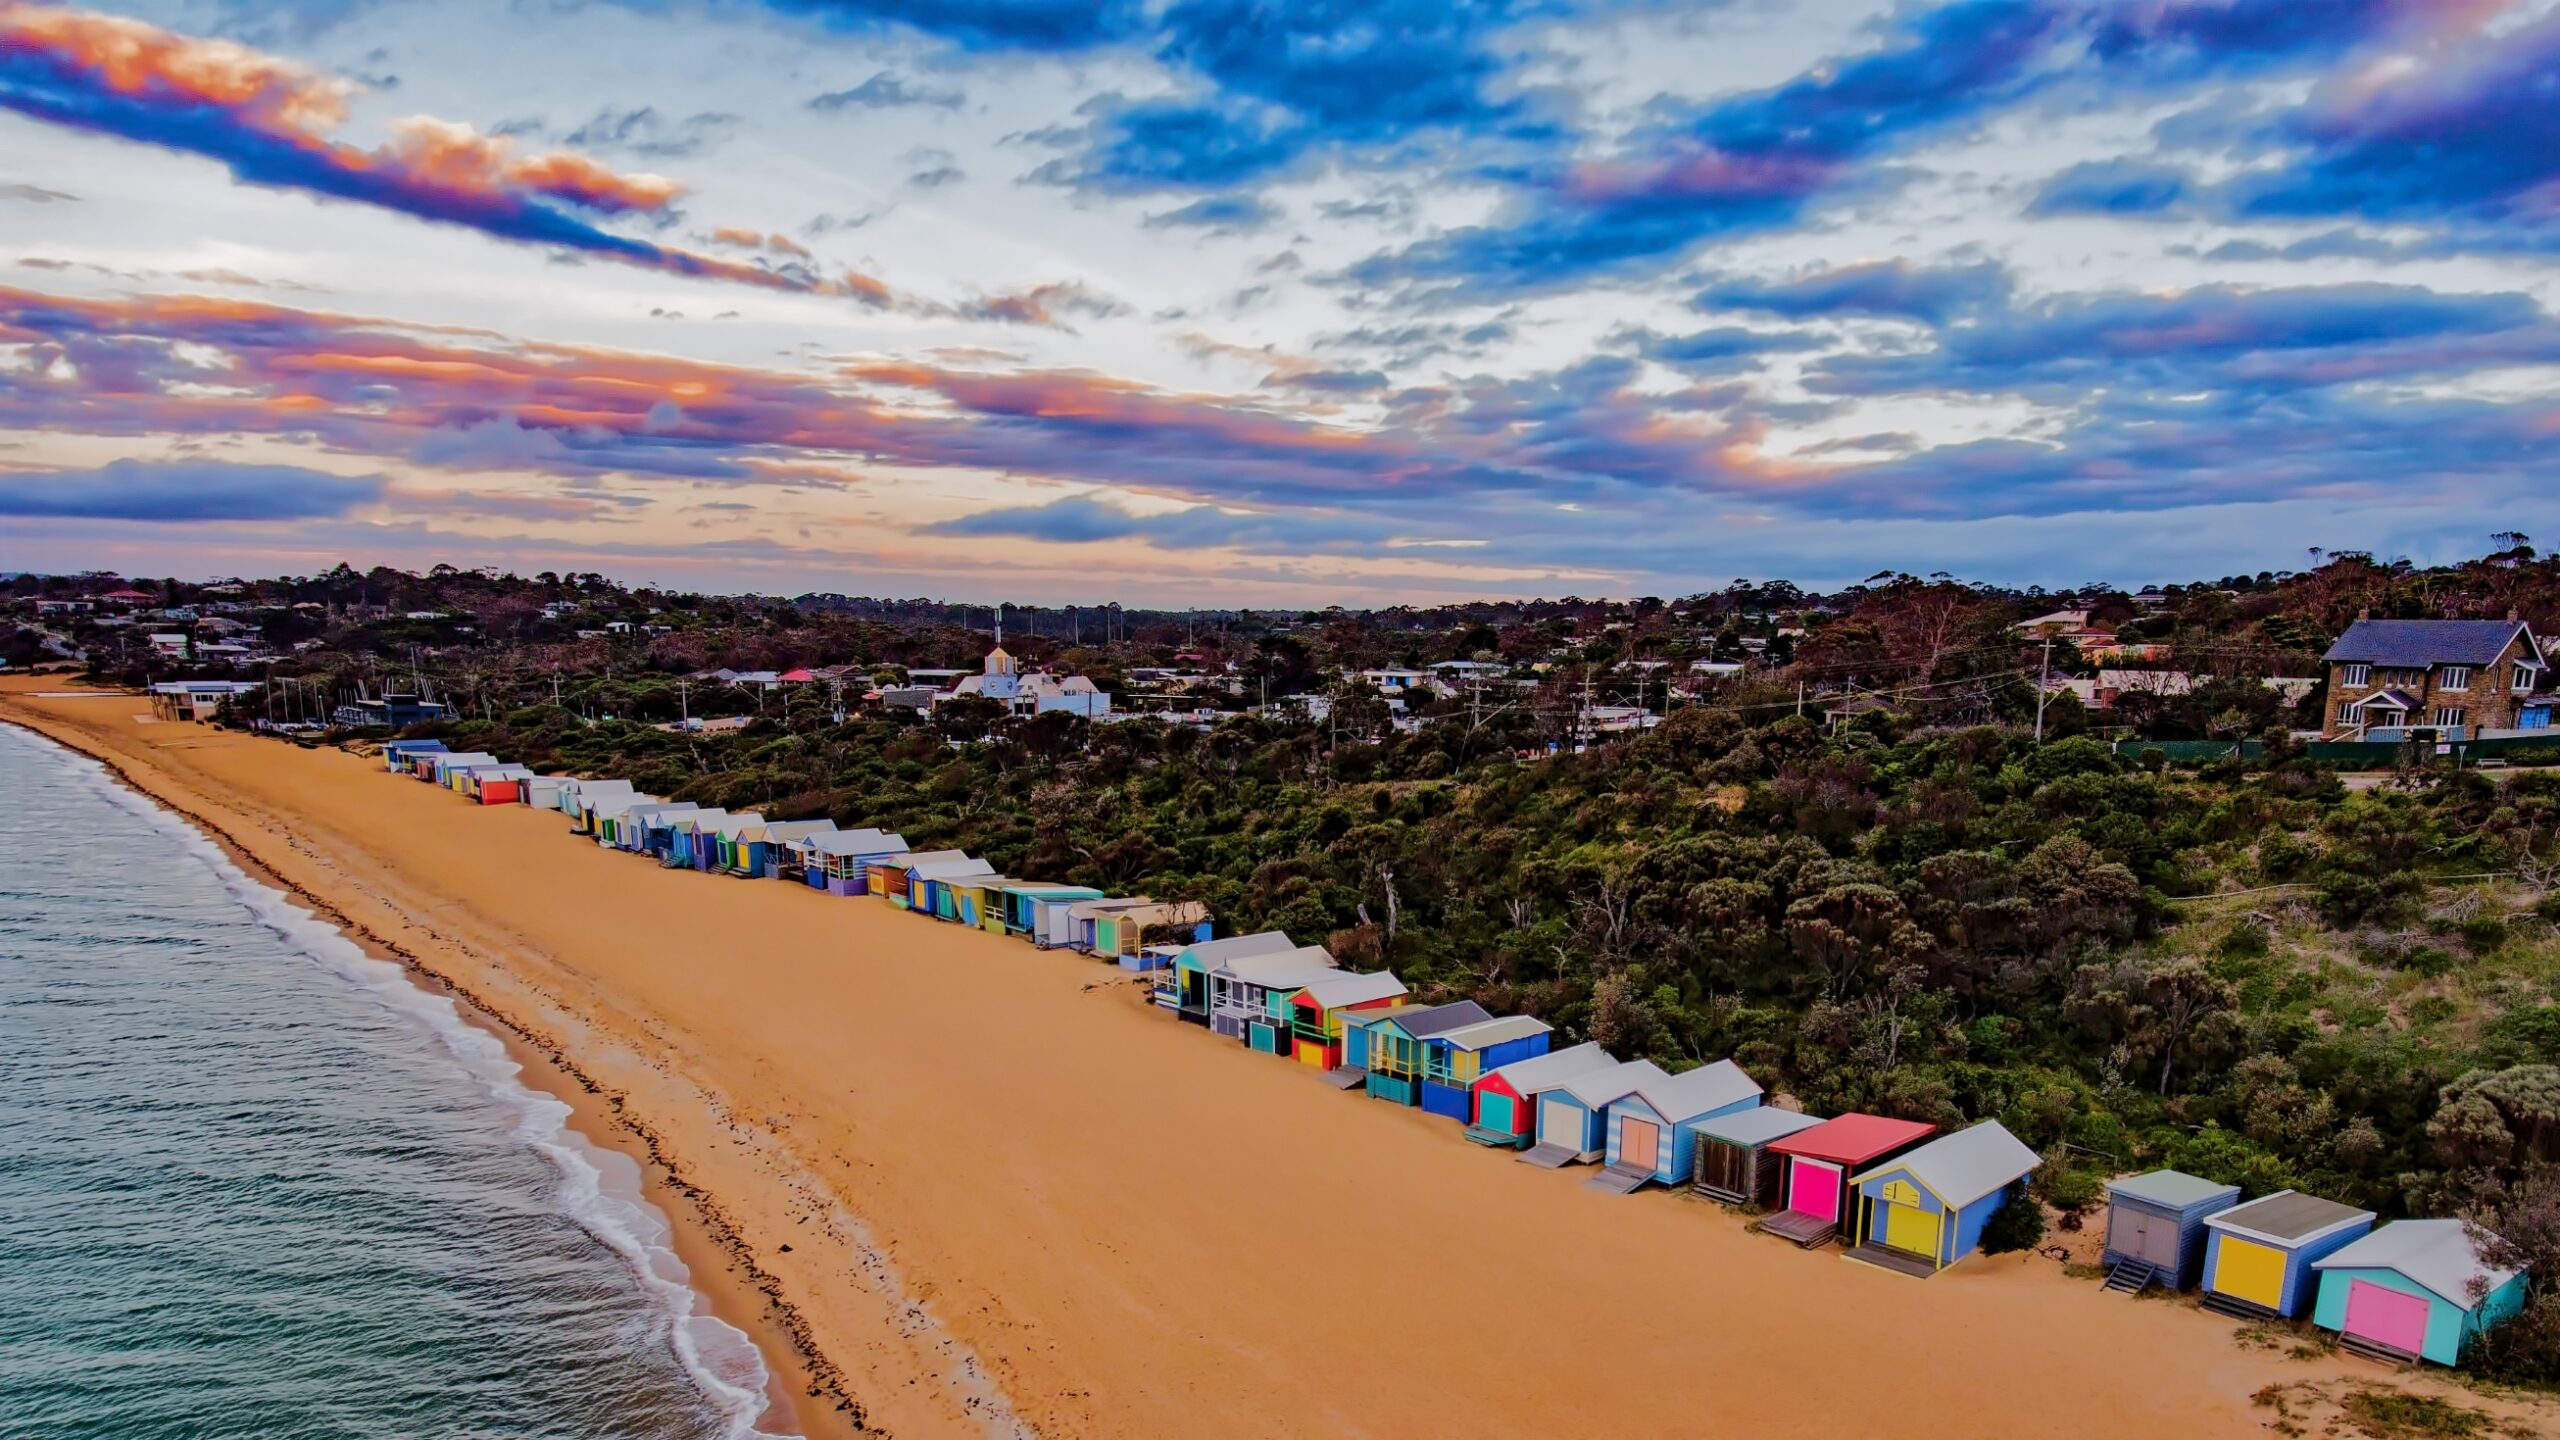 A shoreline with a collection of colorful beachboxes lining it.